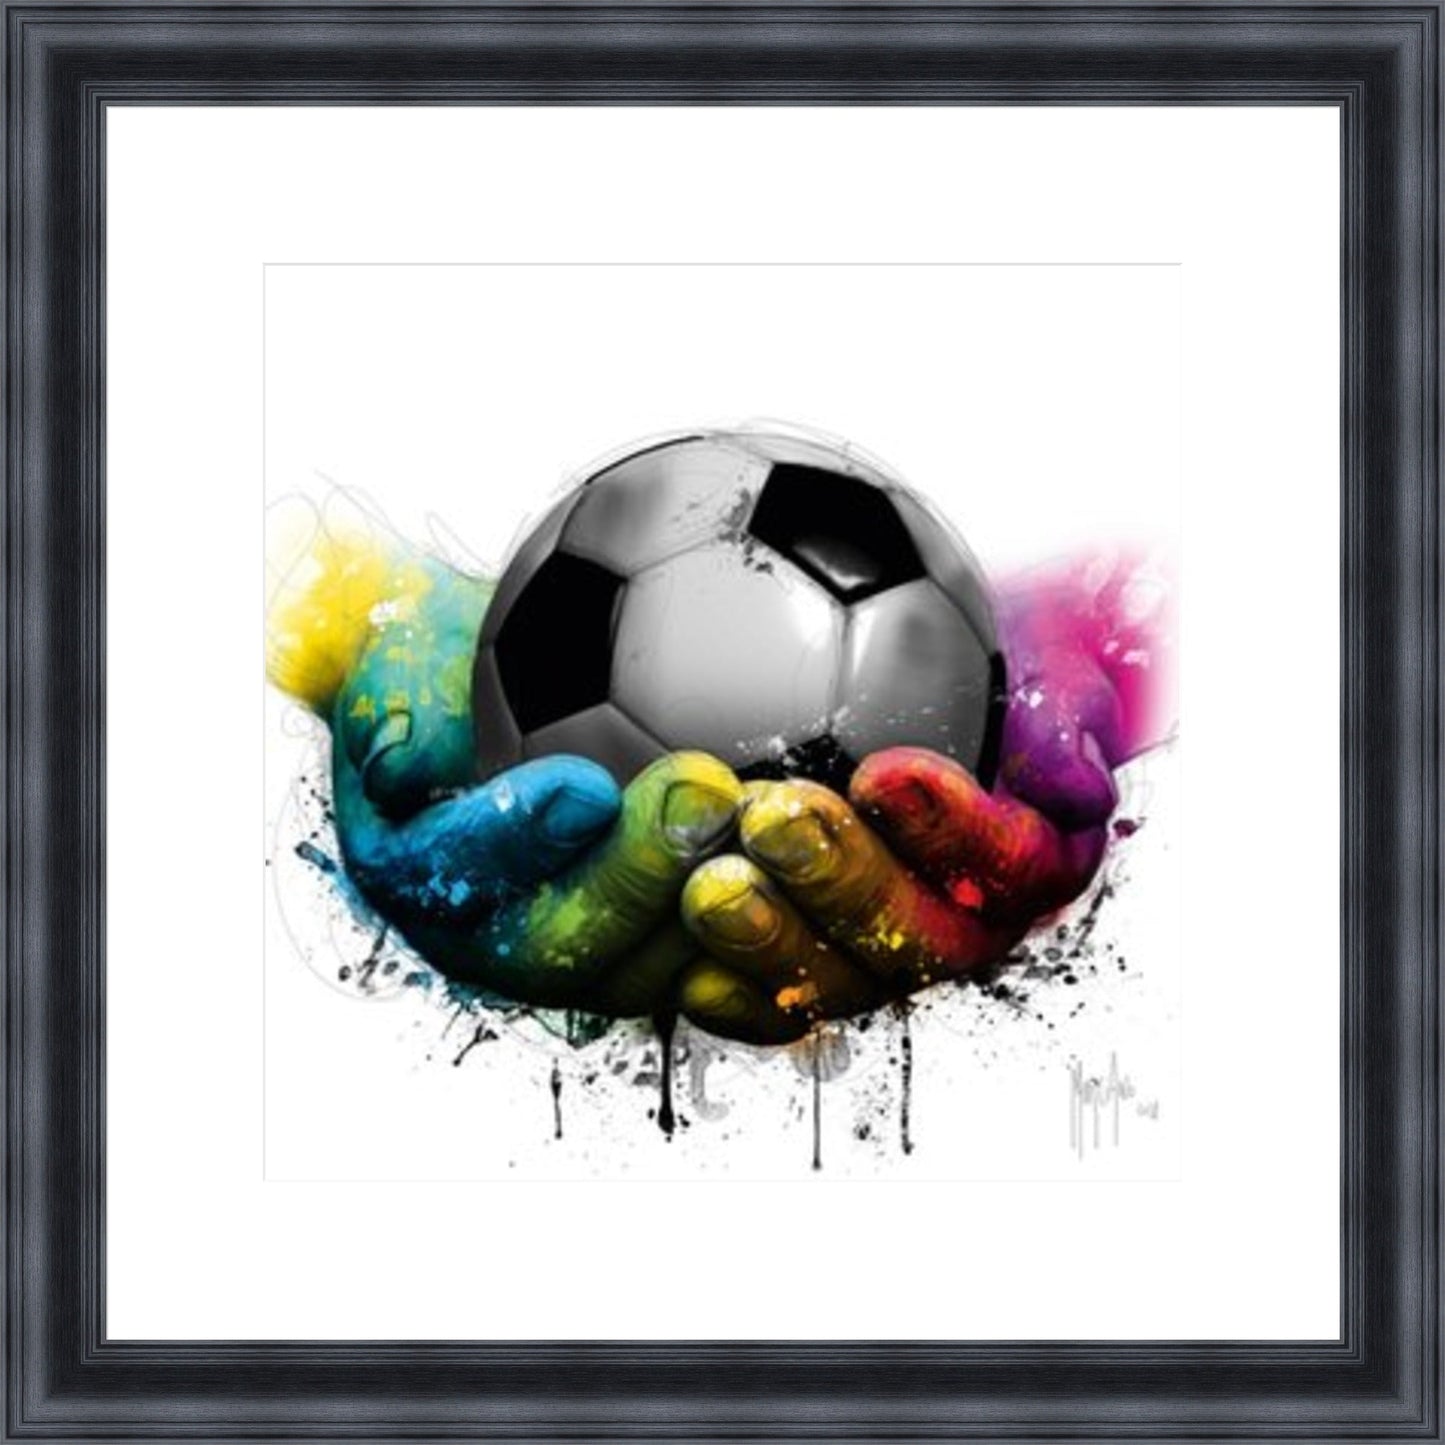 Coupe Du Monde - World Cup by Patrice Murciano